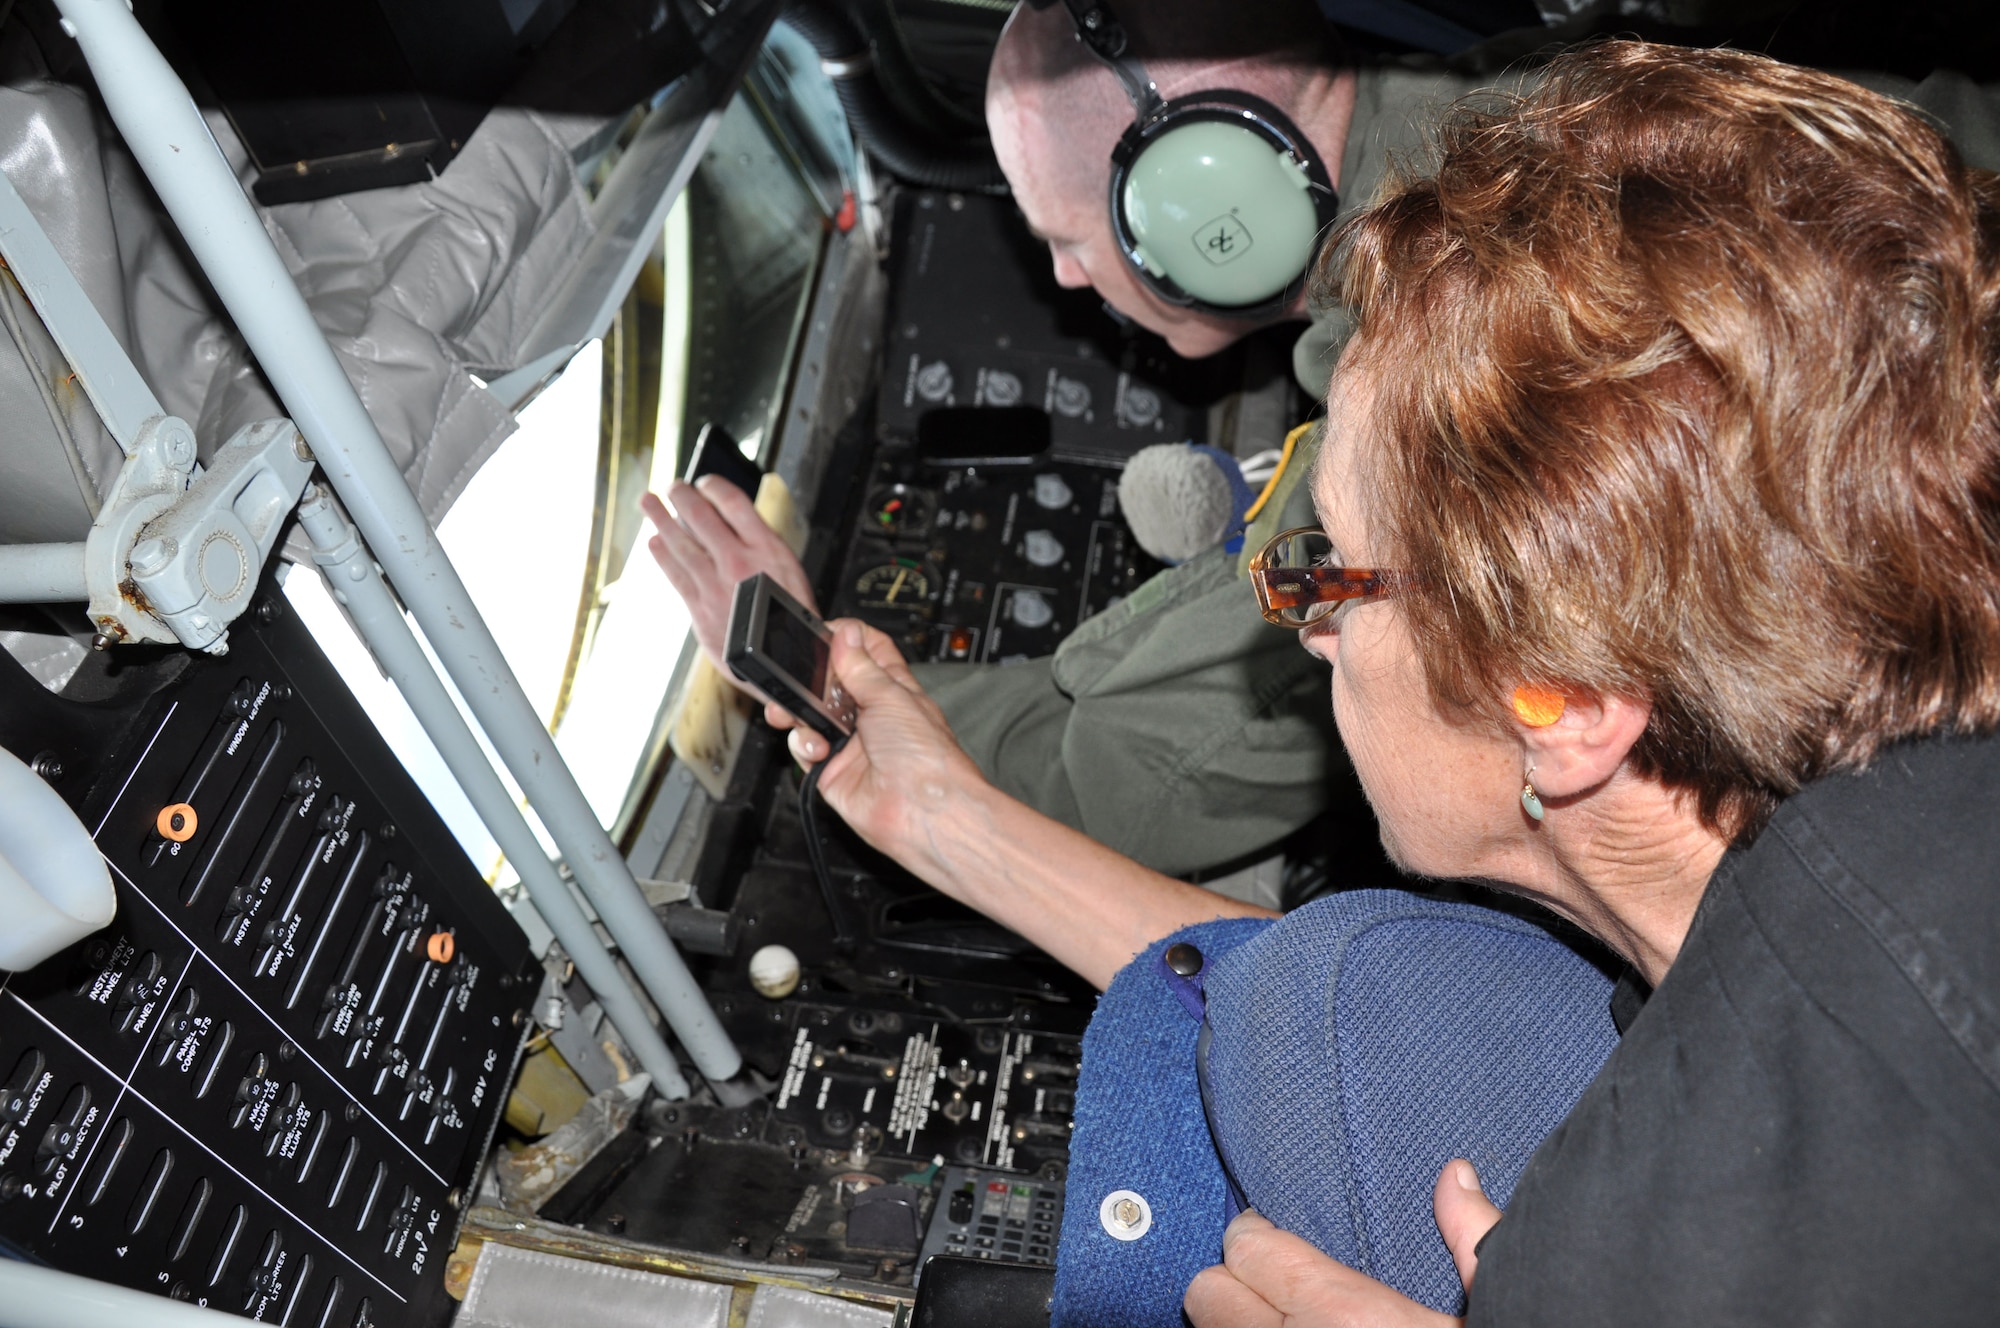 The Honorable Marilyn Lee, Hawaii State House of Representatives, watches as Senior Master Sgt. Ray Lewis, boom operator of a KC-135 Stratotanker, refuels a Hawaii Air National Guard F-15 Eagle over the Hawaiian Islands Nov. 7 as a part of the 624th Regional Support Group’s first-ever Employer Support Flight at Hickam Air Force Base, Hawaii. The event, held in co-operation with the Hawaii Committee of the Employer Support for the Guard and Reserve, helped employers better understand the time and sacrifice their employees invest in their role as Air Force Reservists. The KC-135 used for Saturday's Employer Support Flight is assigned to the 452nd Air Mobility Wing at March Air Reserve Base, Calif. (Air Force photo/Staff Sgt. Erin Smith)